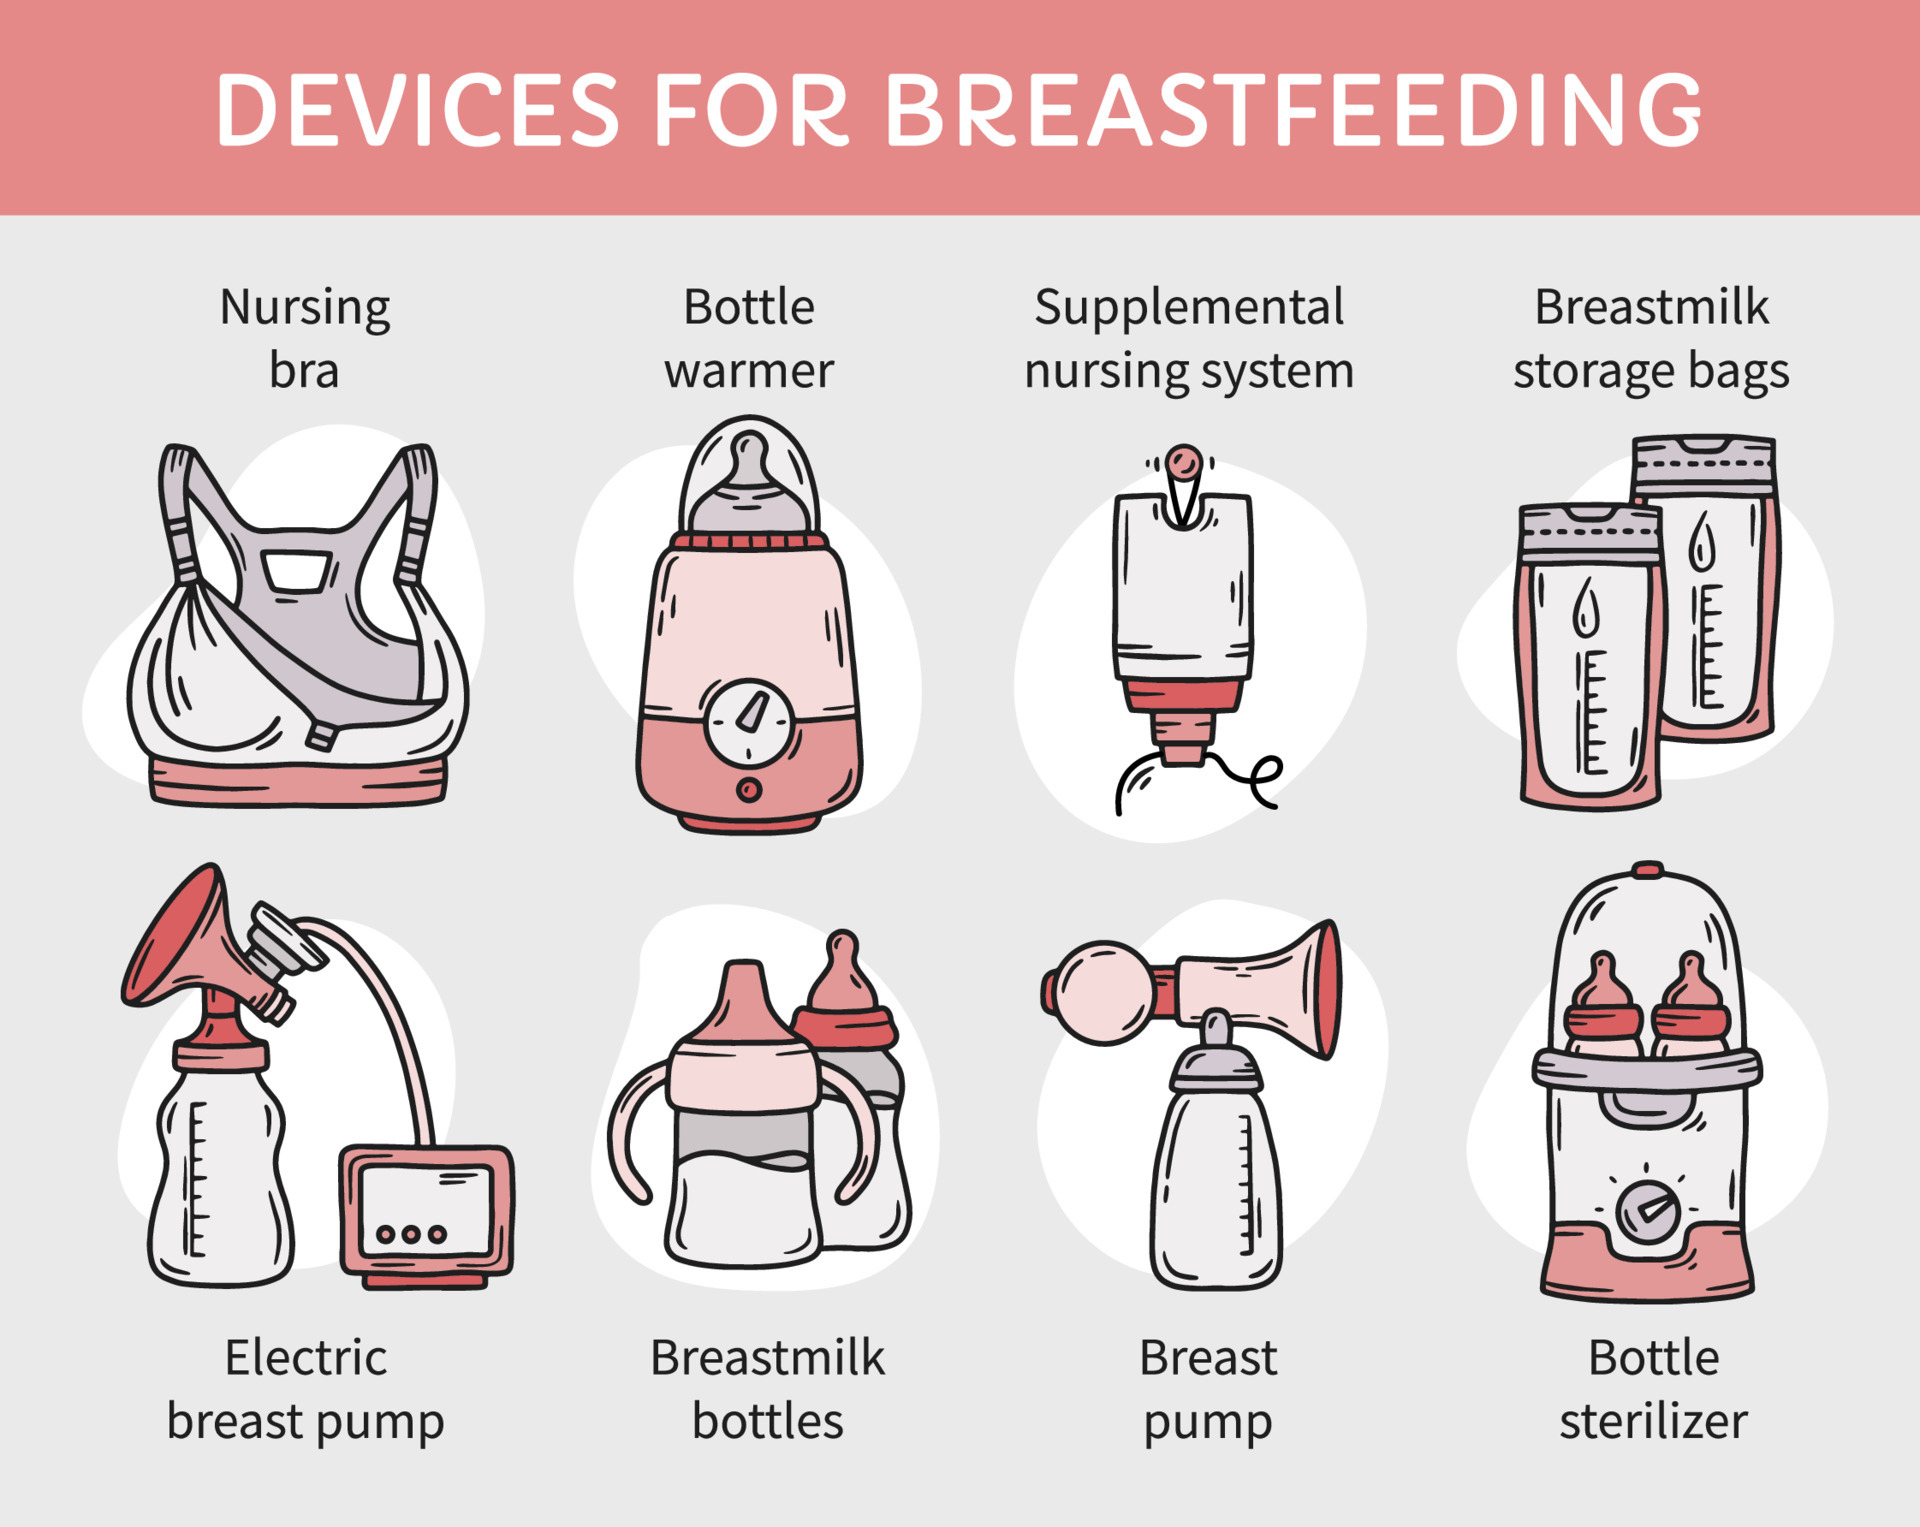 https://static.vecteezy.com/system/resources/previews/006/248/166/original/devices-and-equipment-for-breastfeeding-with-milk-or-infant-formula-pink-infographic-lactation-bottles-sterilizer-bags-and-a-bra-during-nursing-vector.jpg